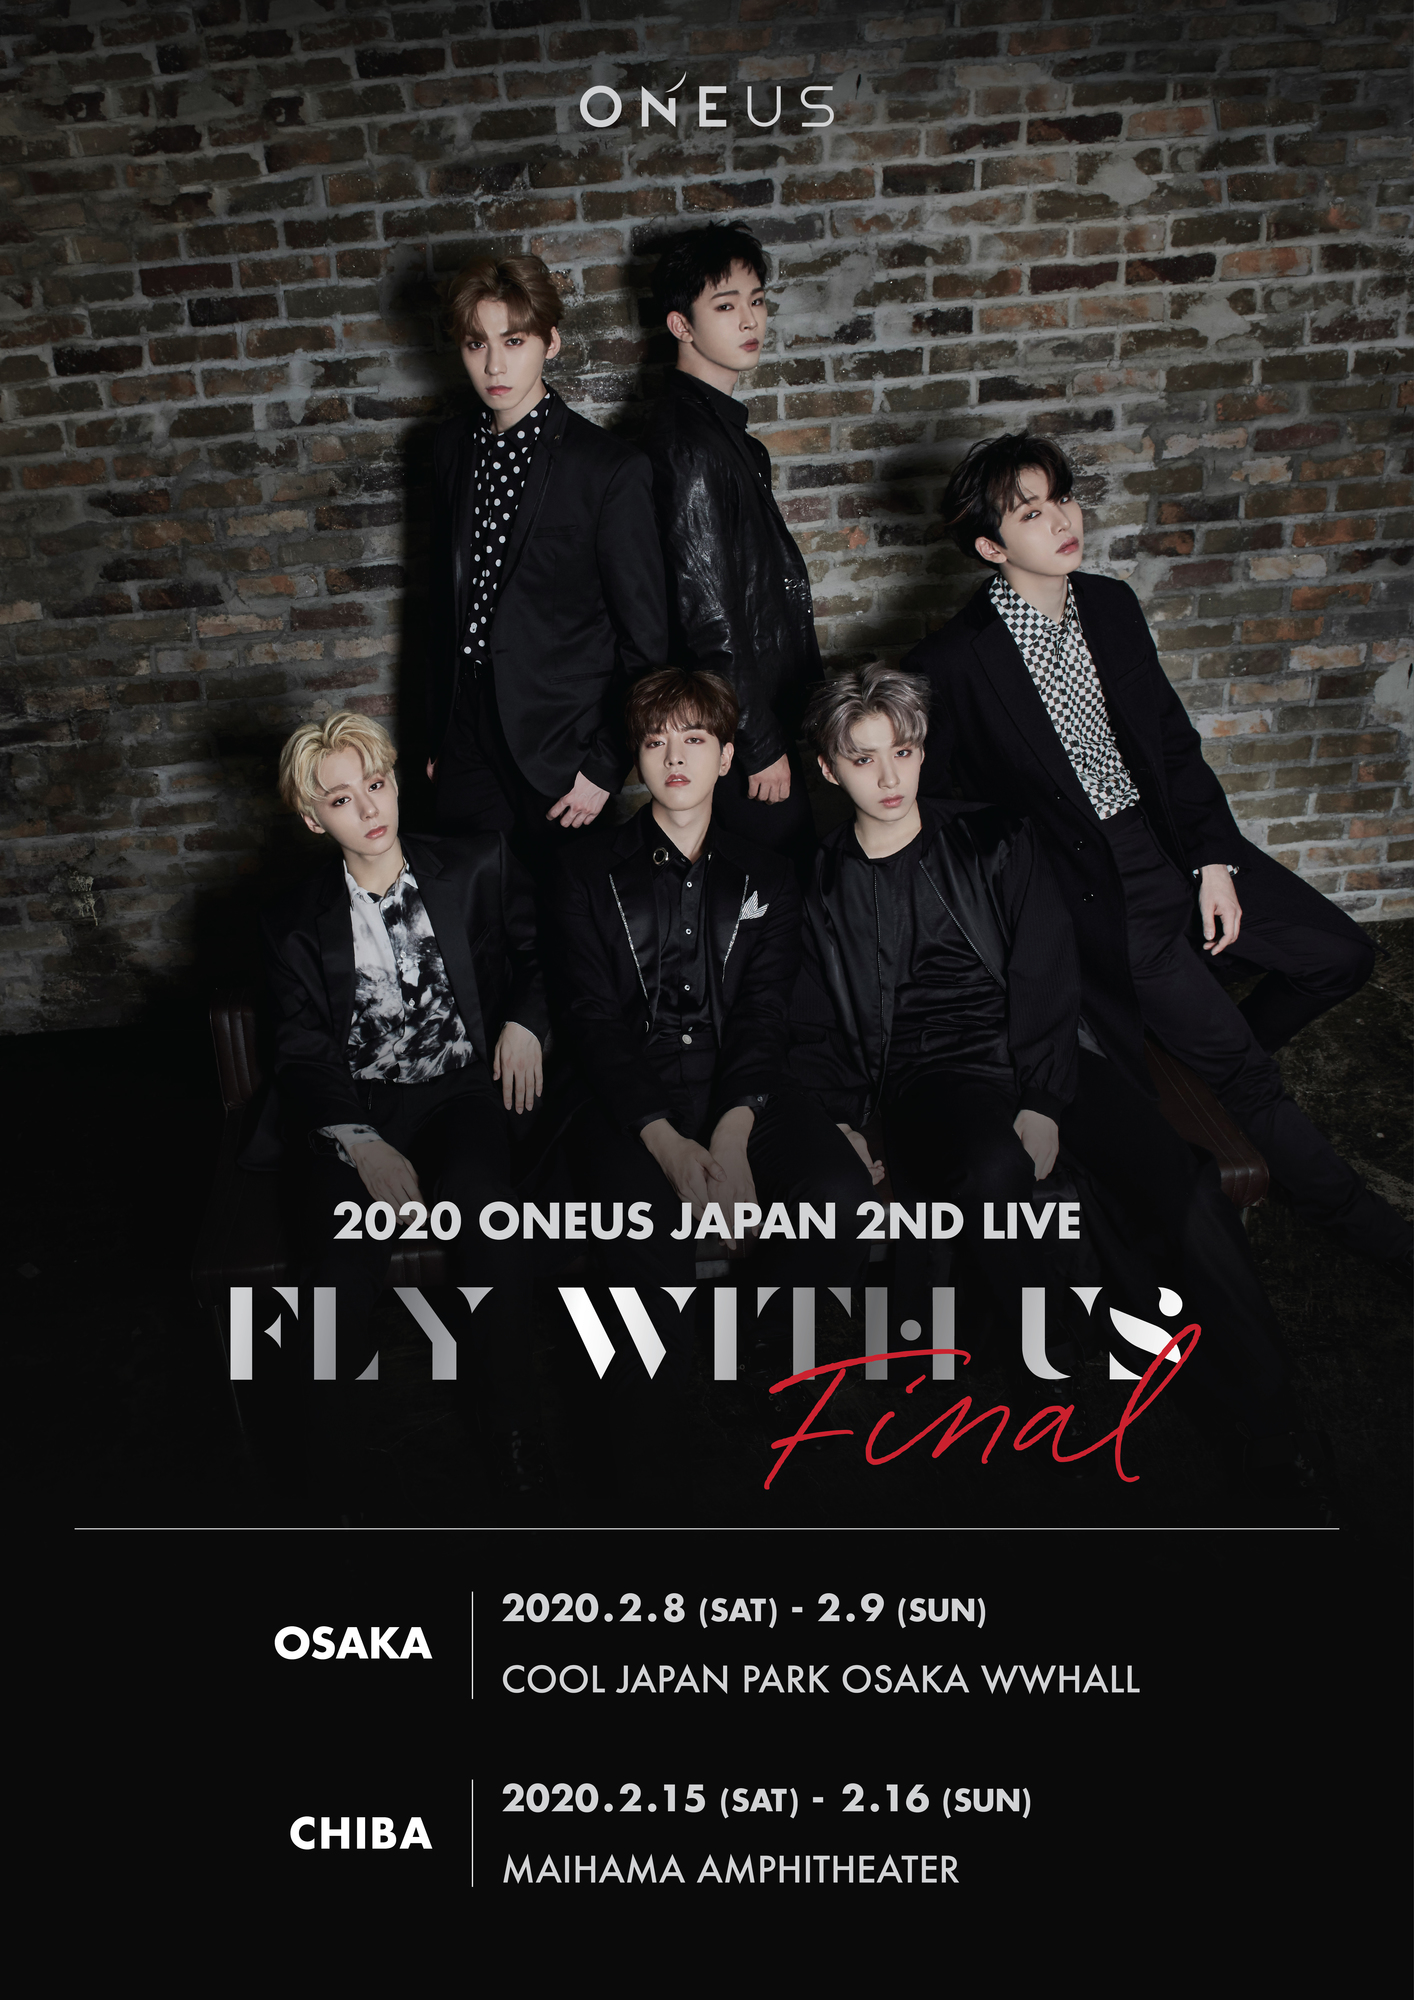 2020 ONEUS JAPAN 2ND LIVE : FLY WITH US FINAL